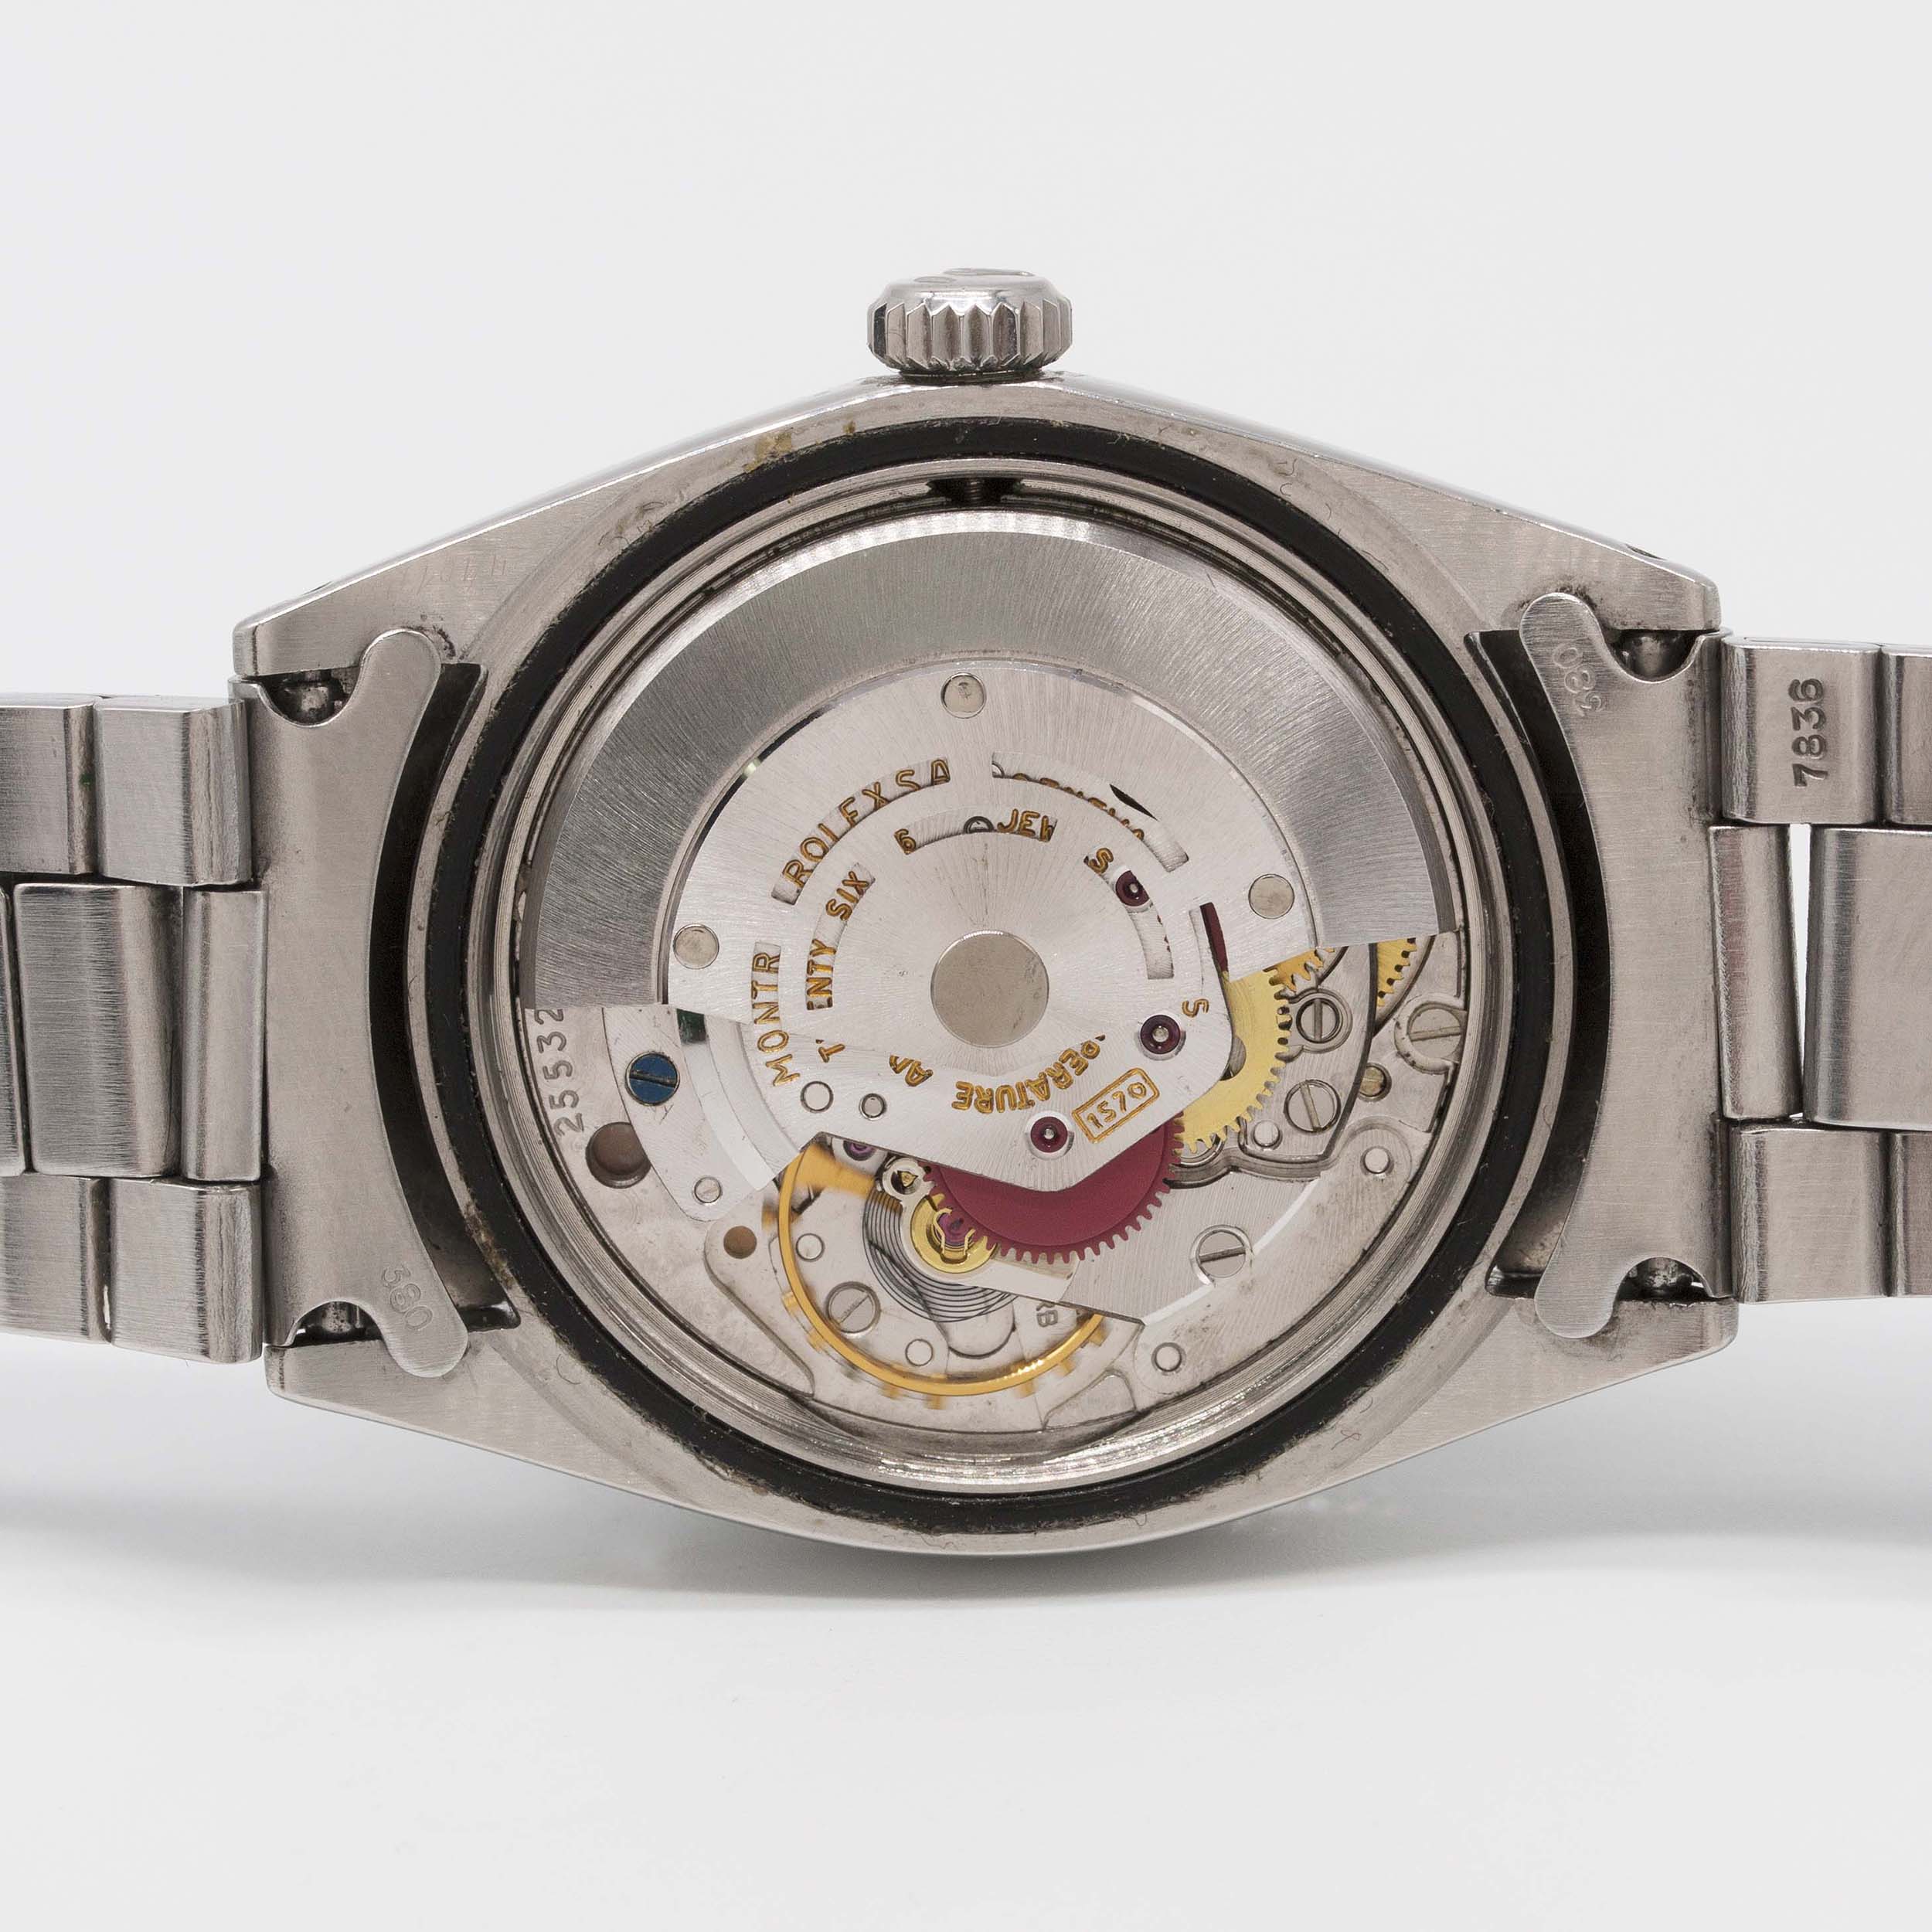 A RARE GENTLEMAN'S STAINLESS STEEL ROLEX OYSTER PERPETUAL EXPLORER BRACELET WATCH CIRCA 1972, REF. - Image 10 of 13